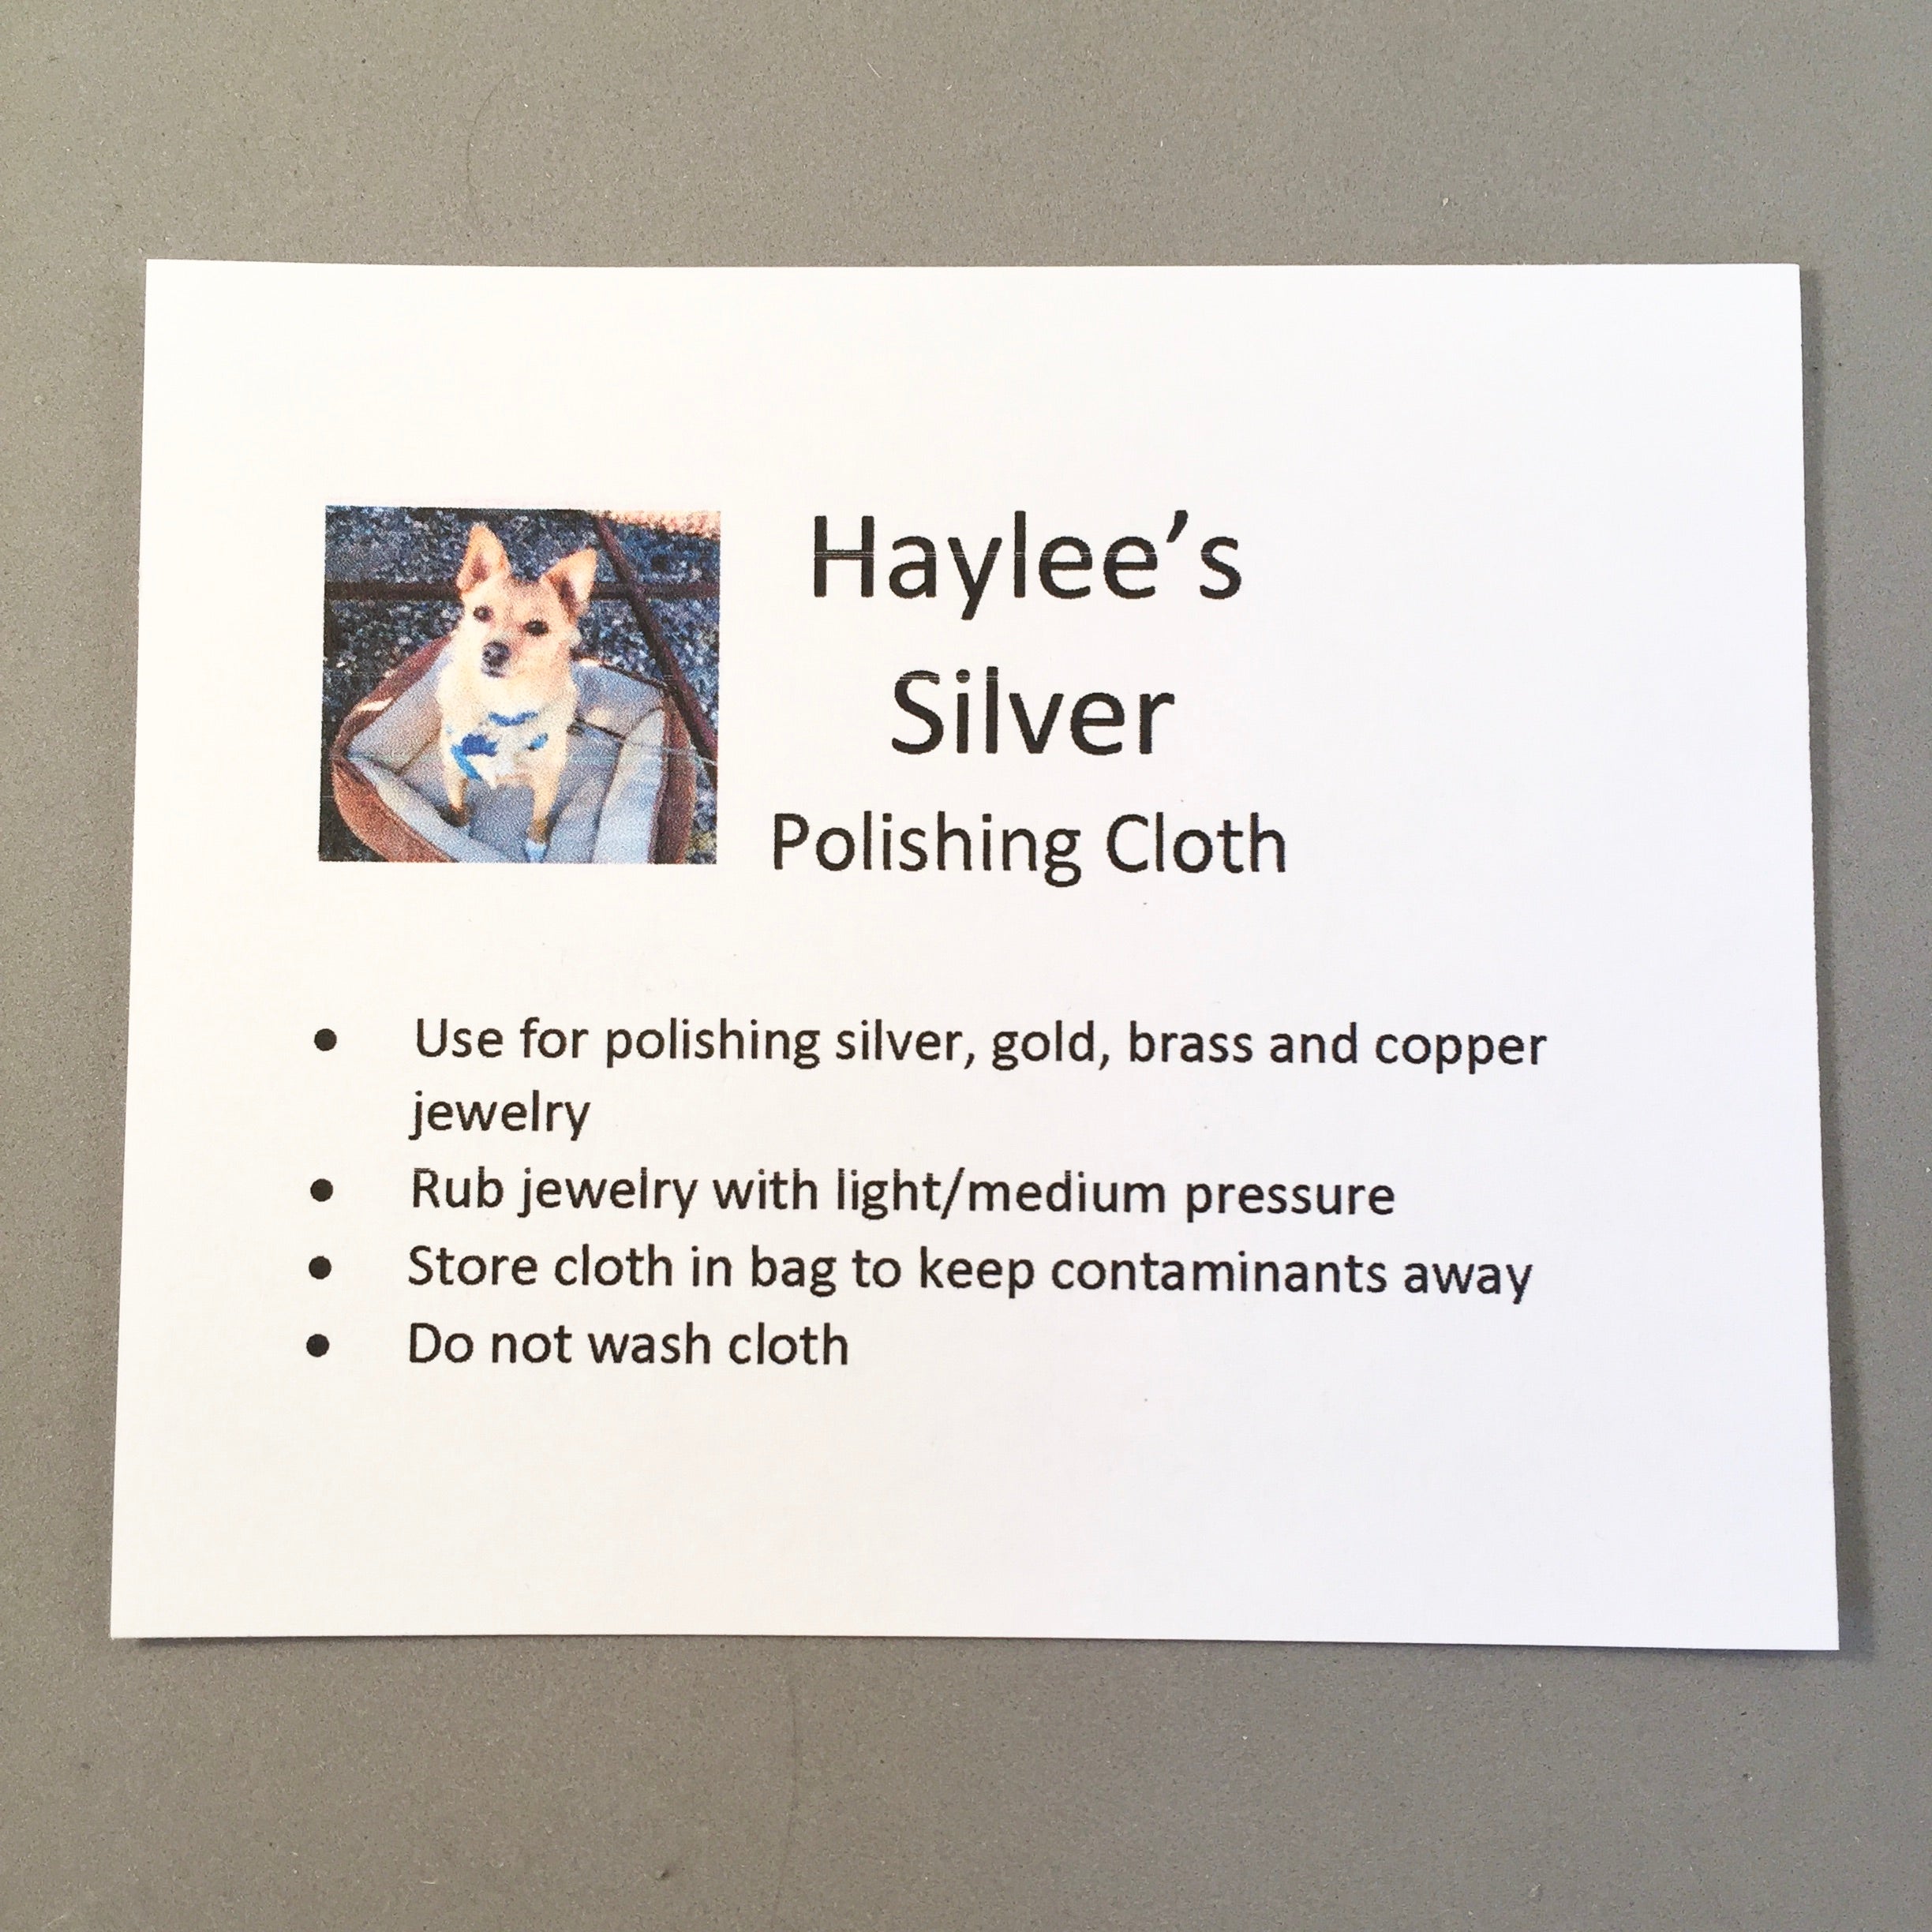 How to Clean a Silver Polishing Cloth